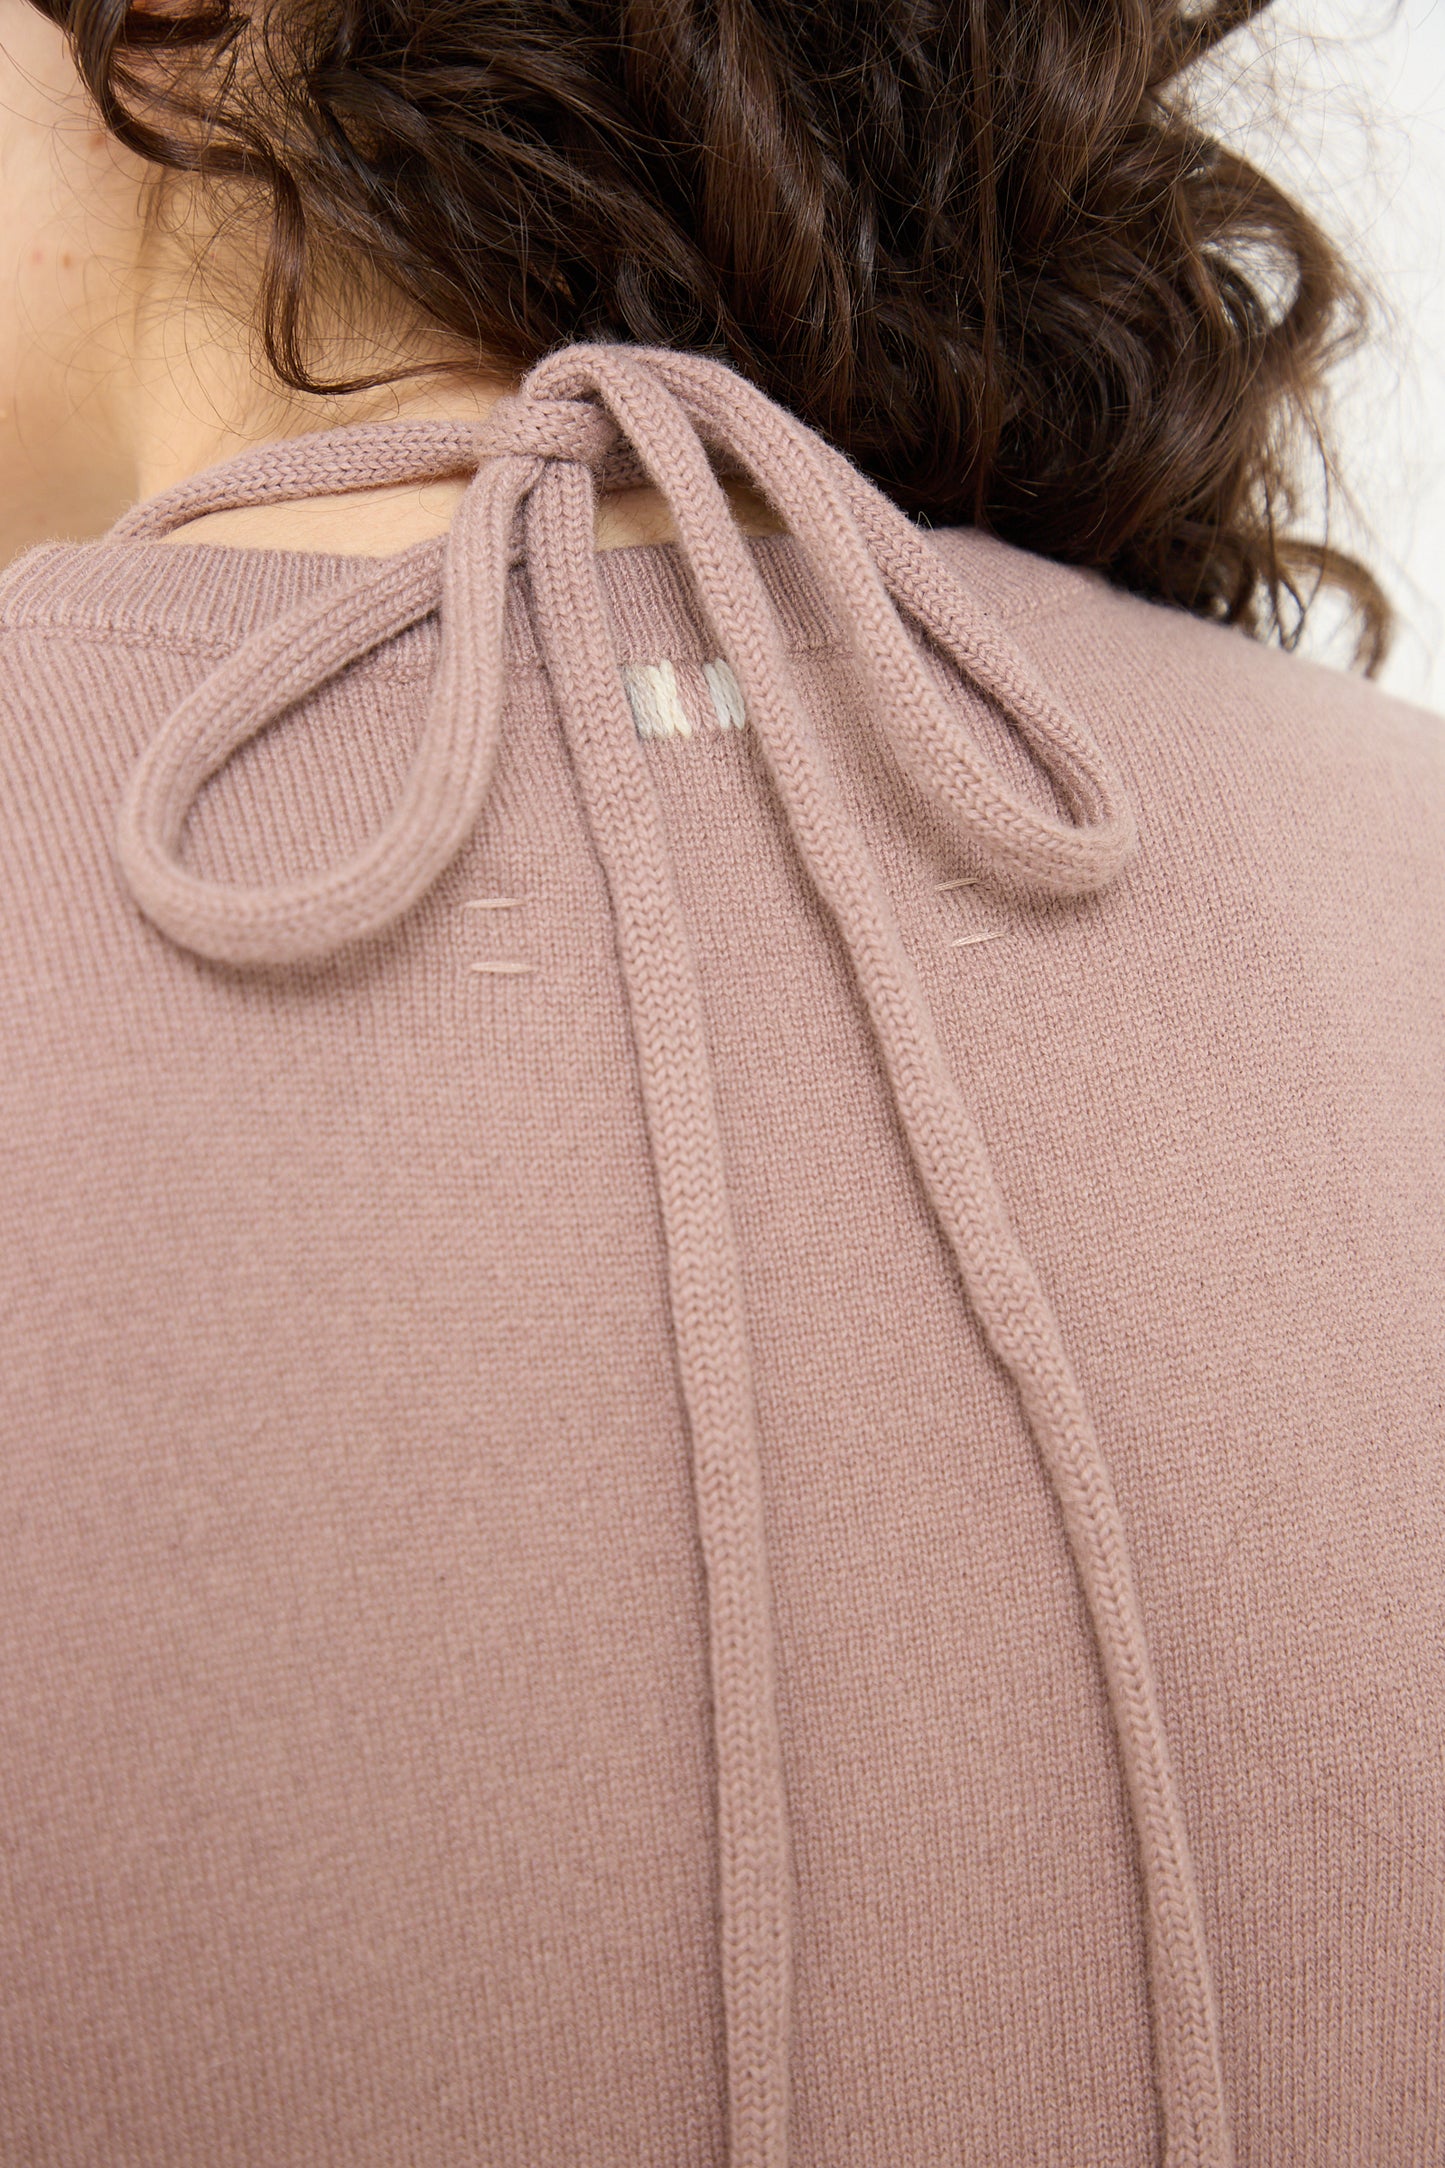 The back of a woman wearing a pink Extreme Cashmere cashmere blend sweater.